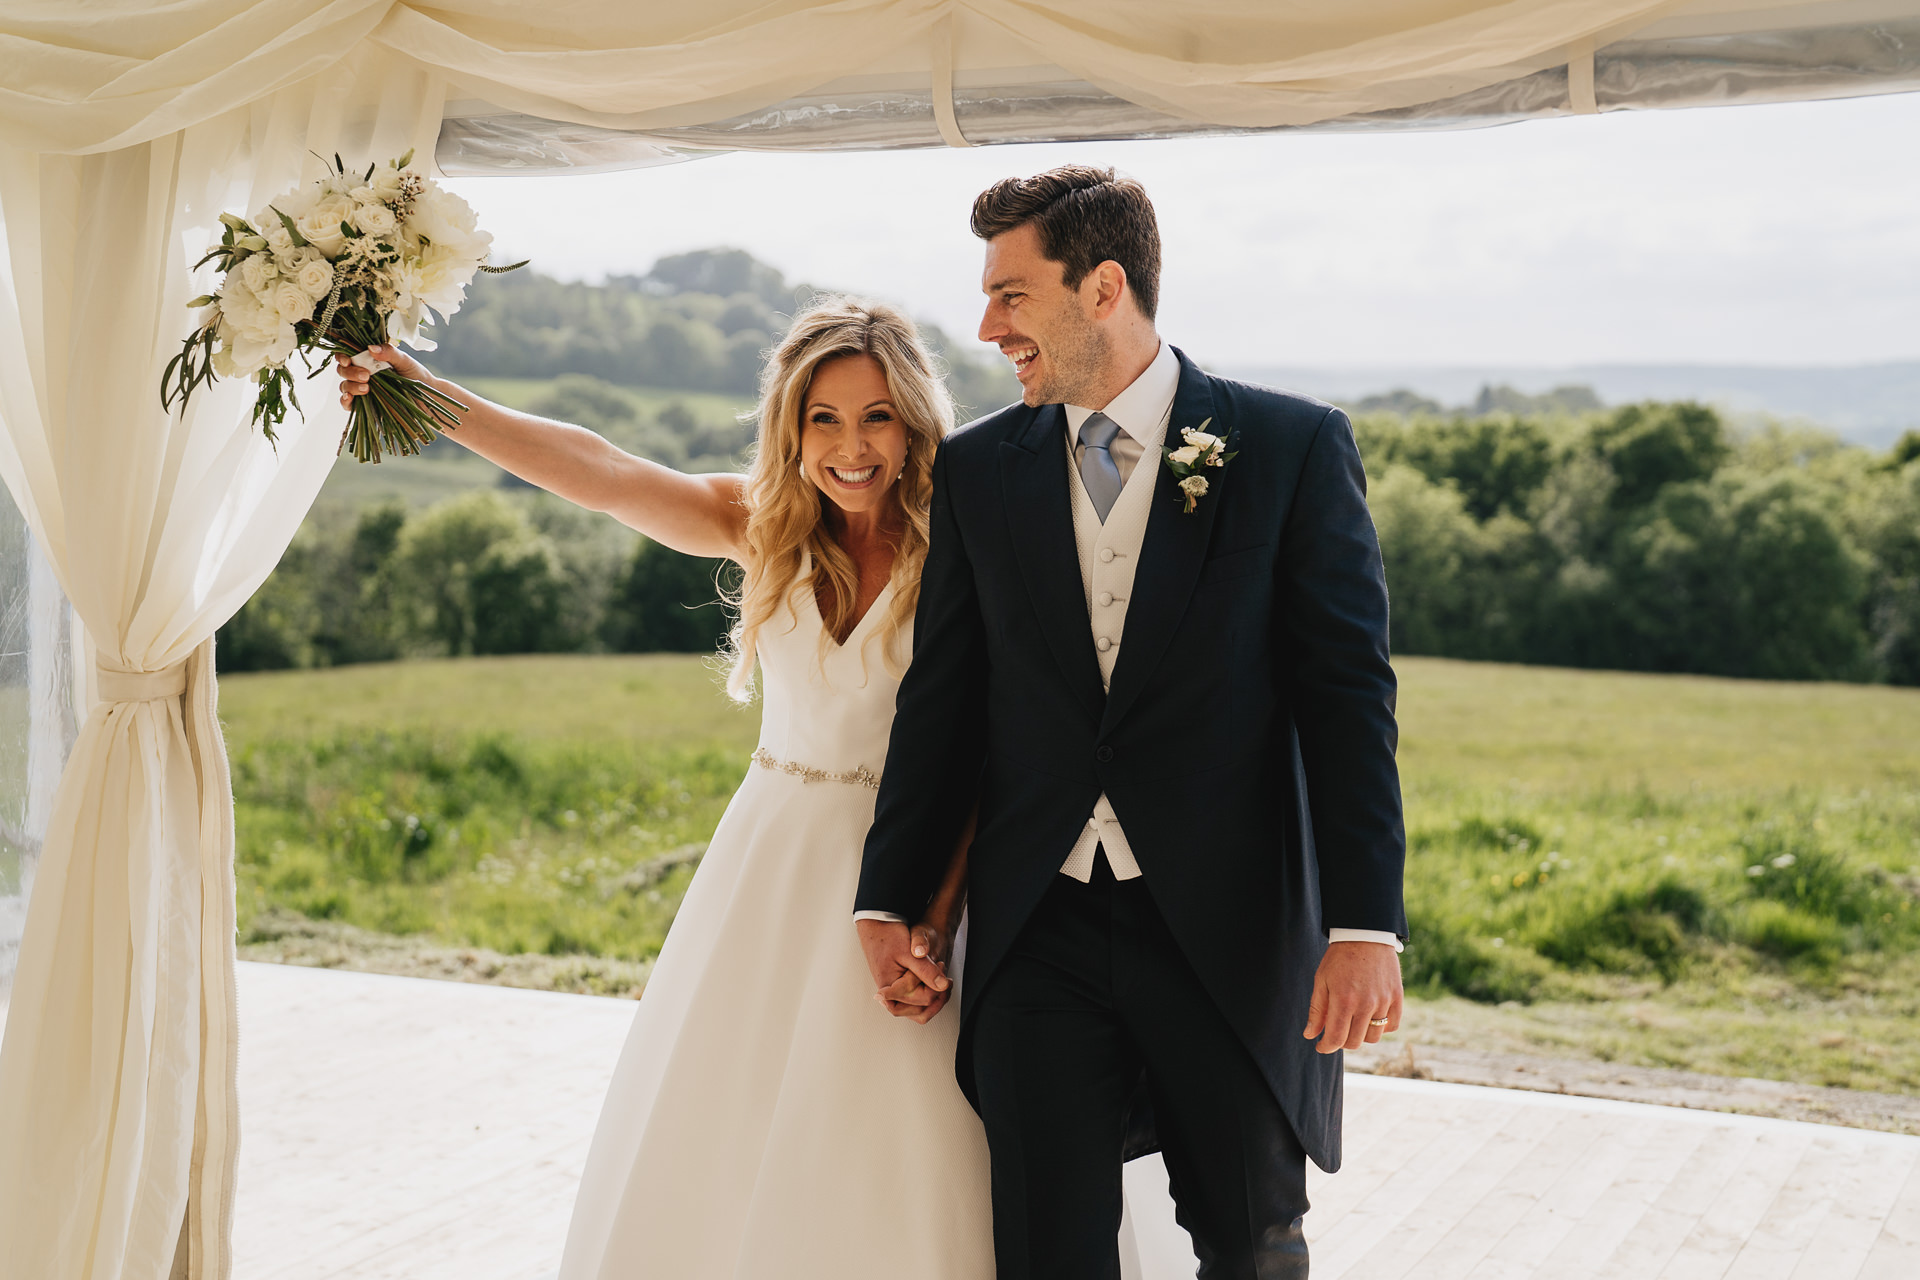 A smiling bride and groom entering a marquee and waving a bouquet, with fields, trees and hills behind them